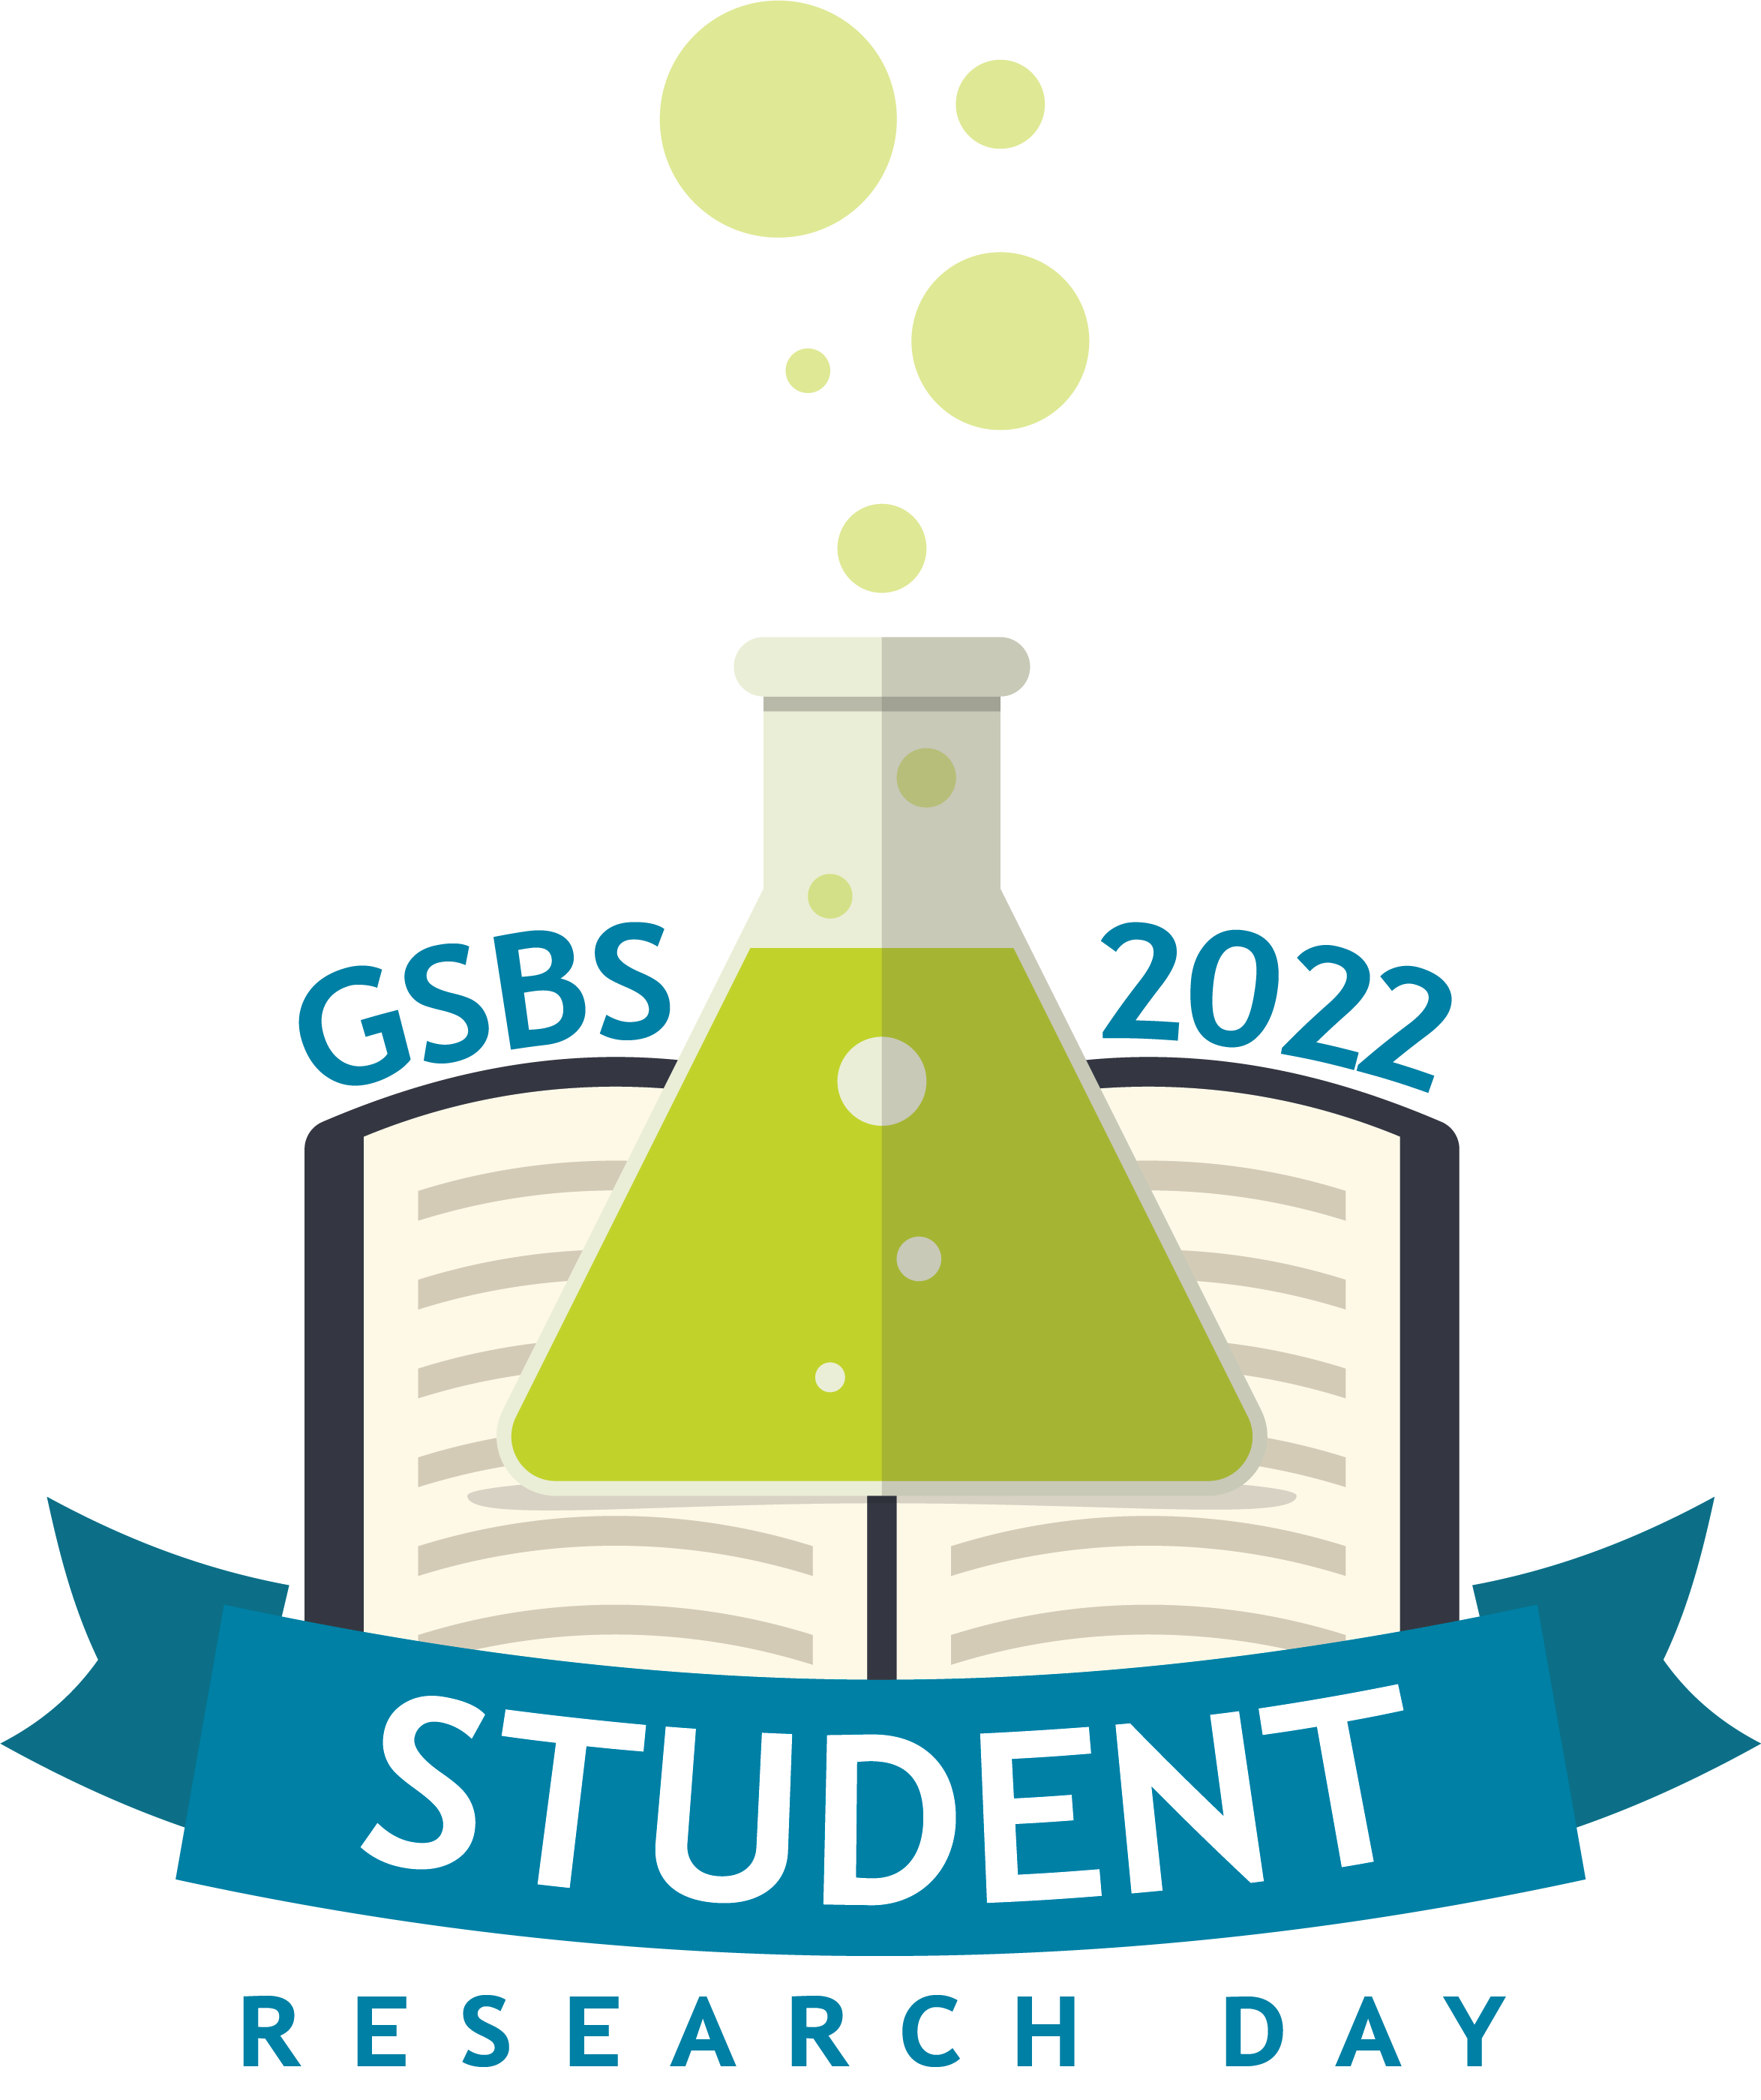 GSBS Student Research Day 2022